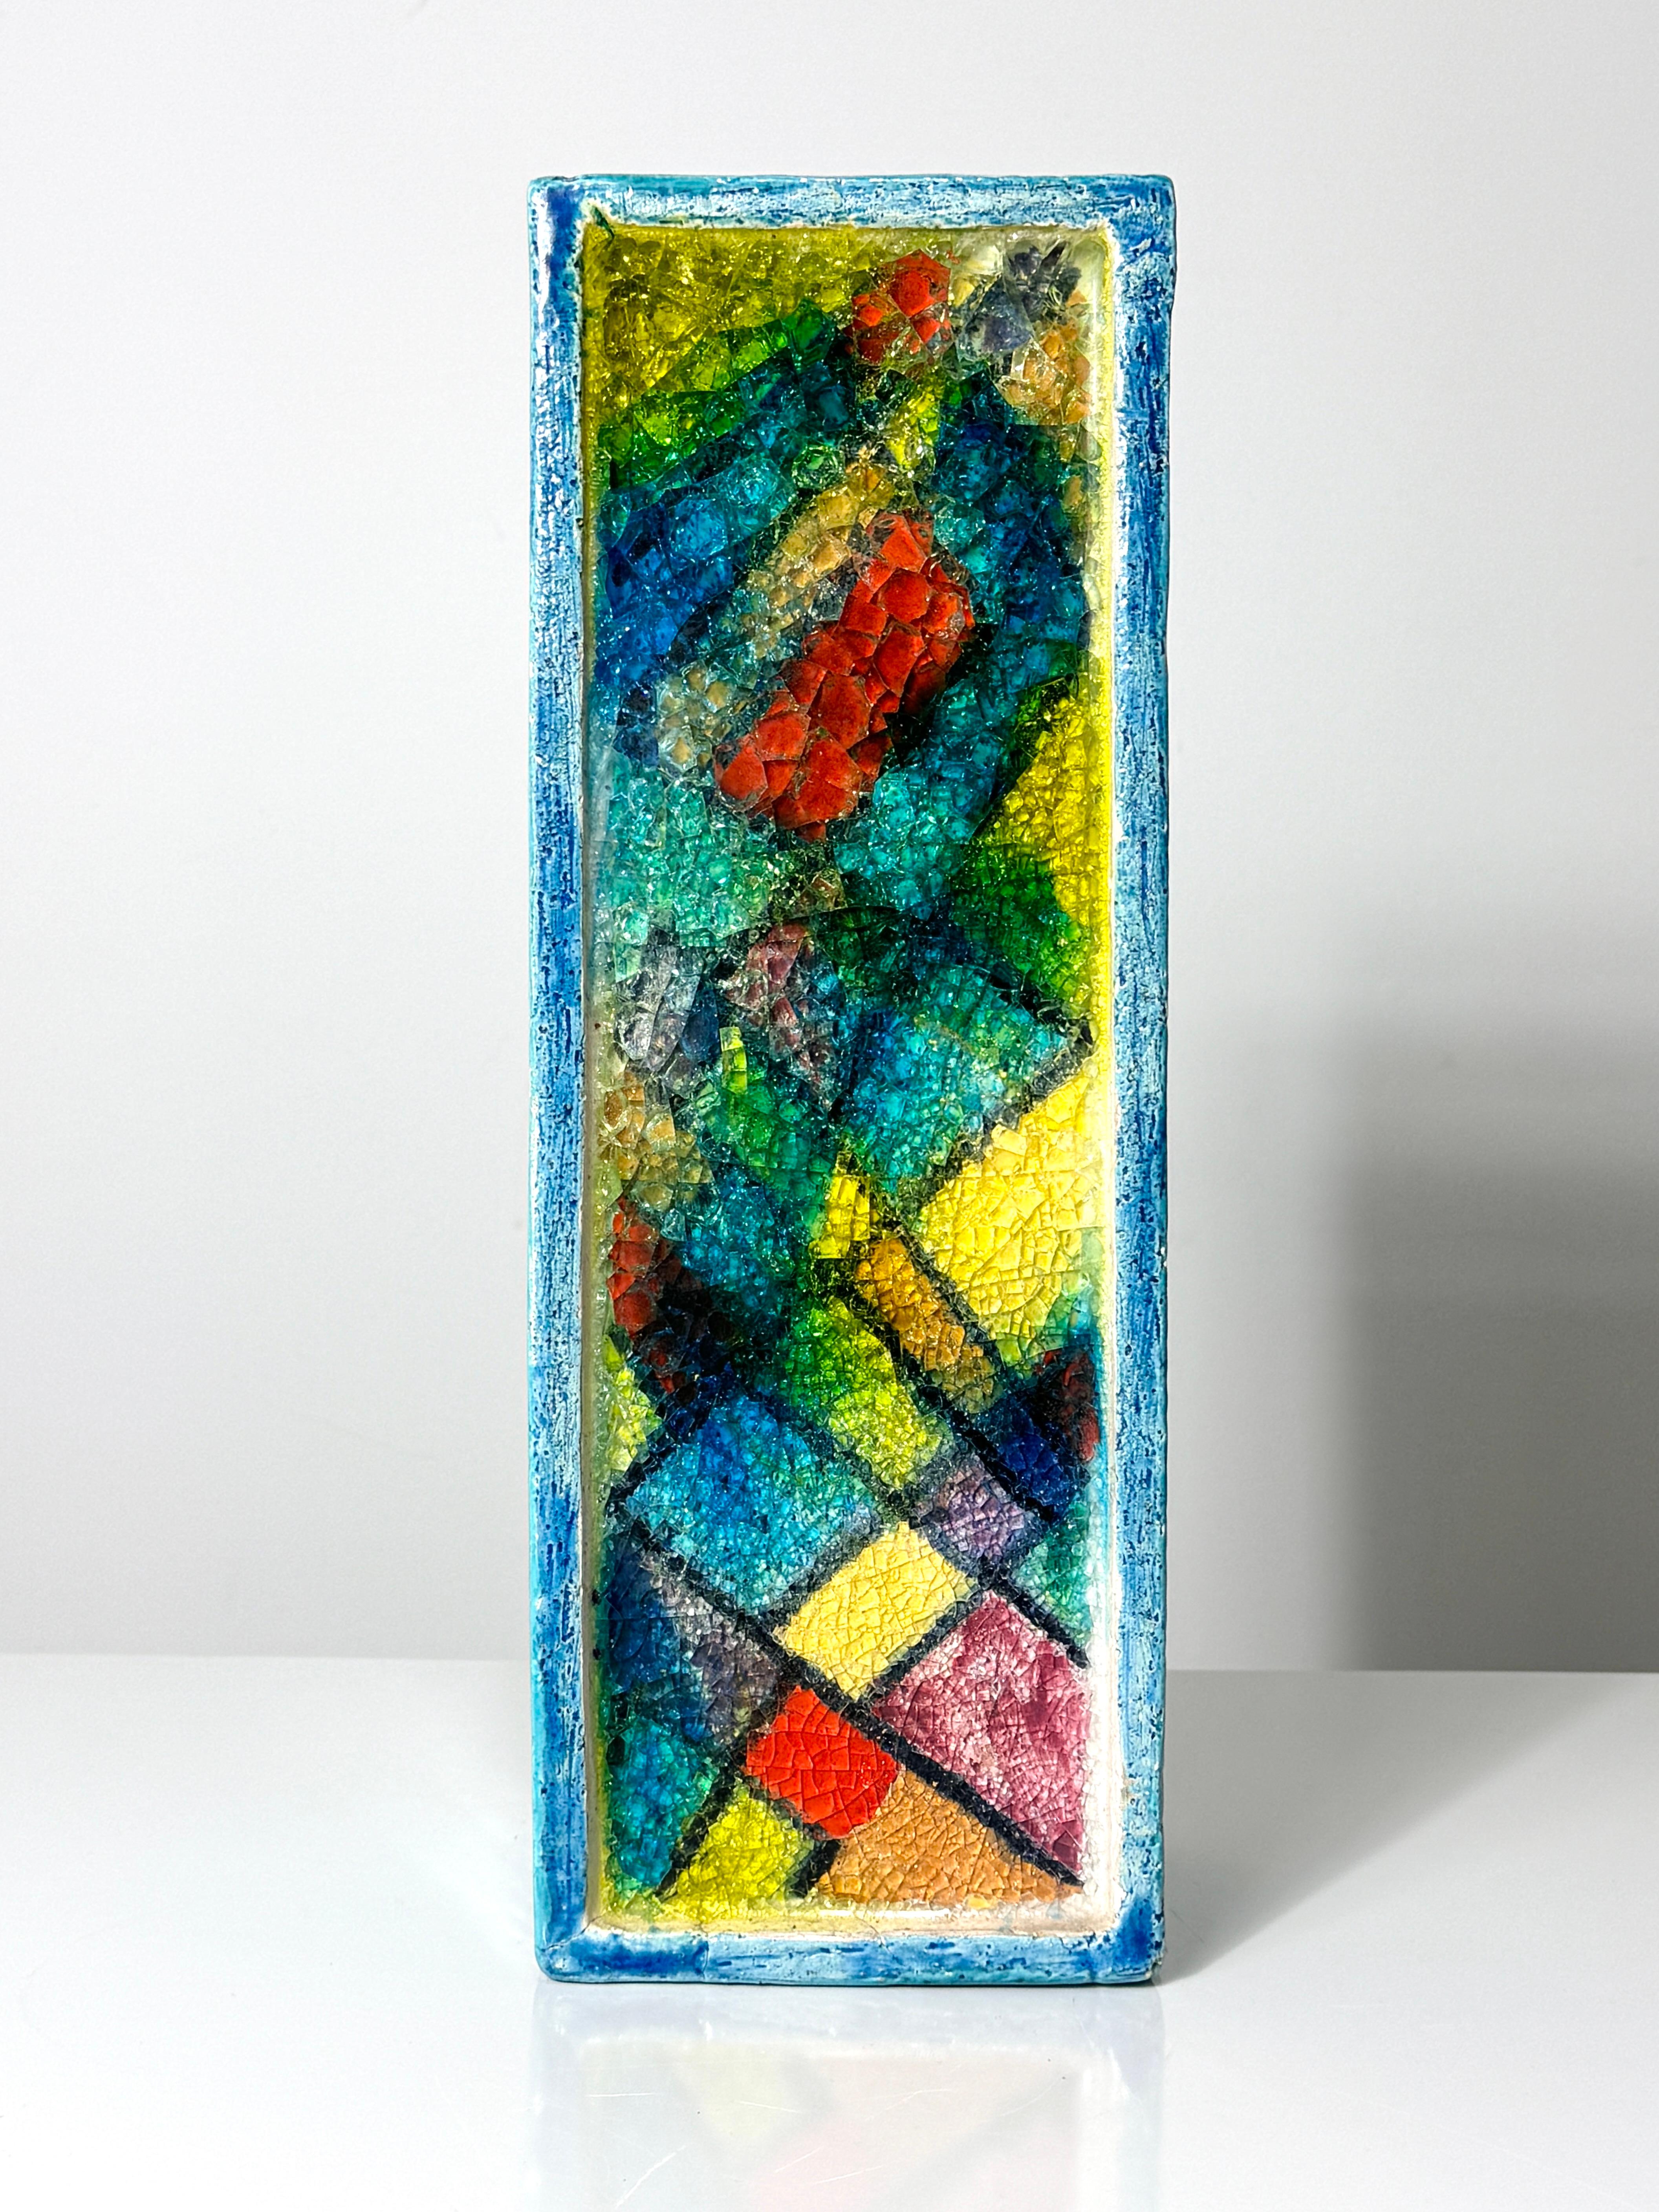 Rare Fritte rectangular vase by Aldo Londi for Bitossi circa 1960s

Colorful modernist mosaic of fused glass inlaid into an aqua blue glazed ceramic slab formed vase

Signed to underside with original label intact

15.5 inch height
5.5 inch width
5